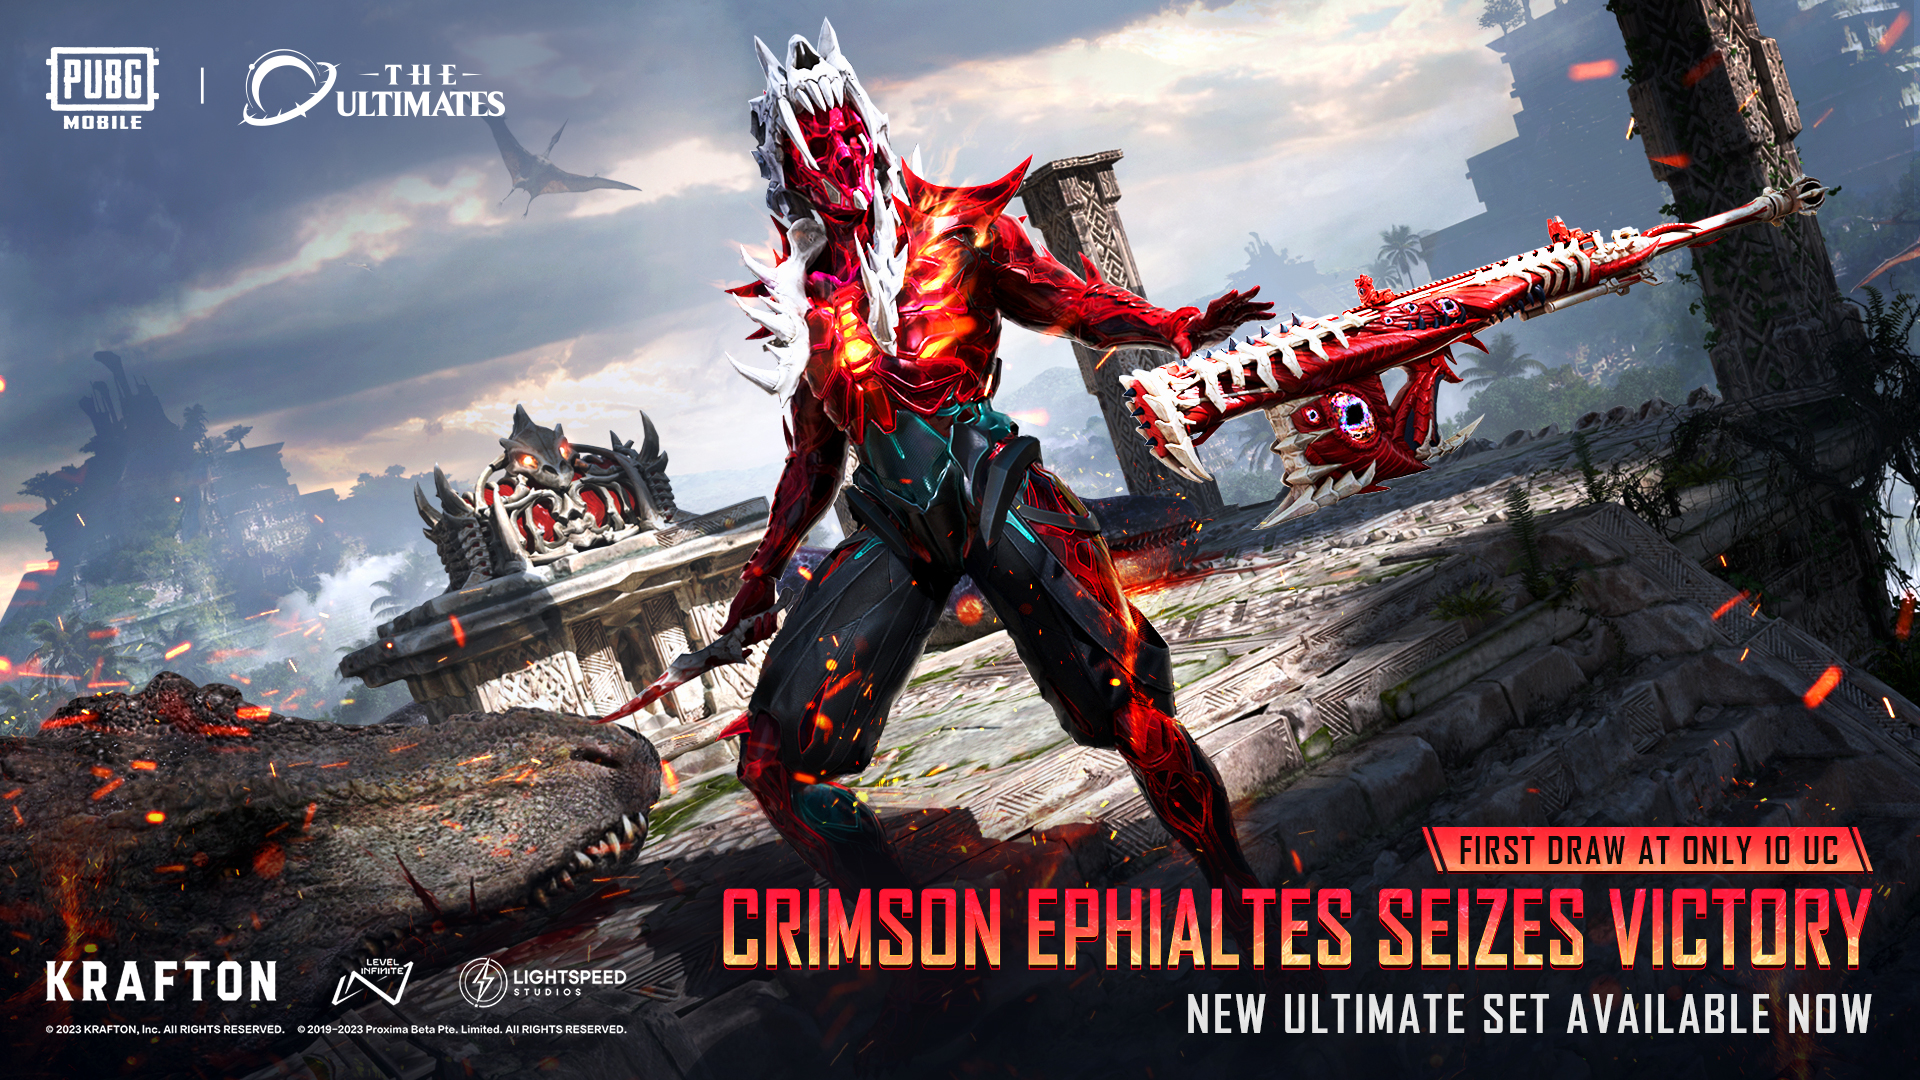 PUBG Mobile Crimson Ephialtes Set: The new Ultimate set is now available